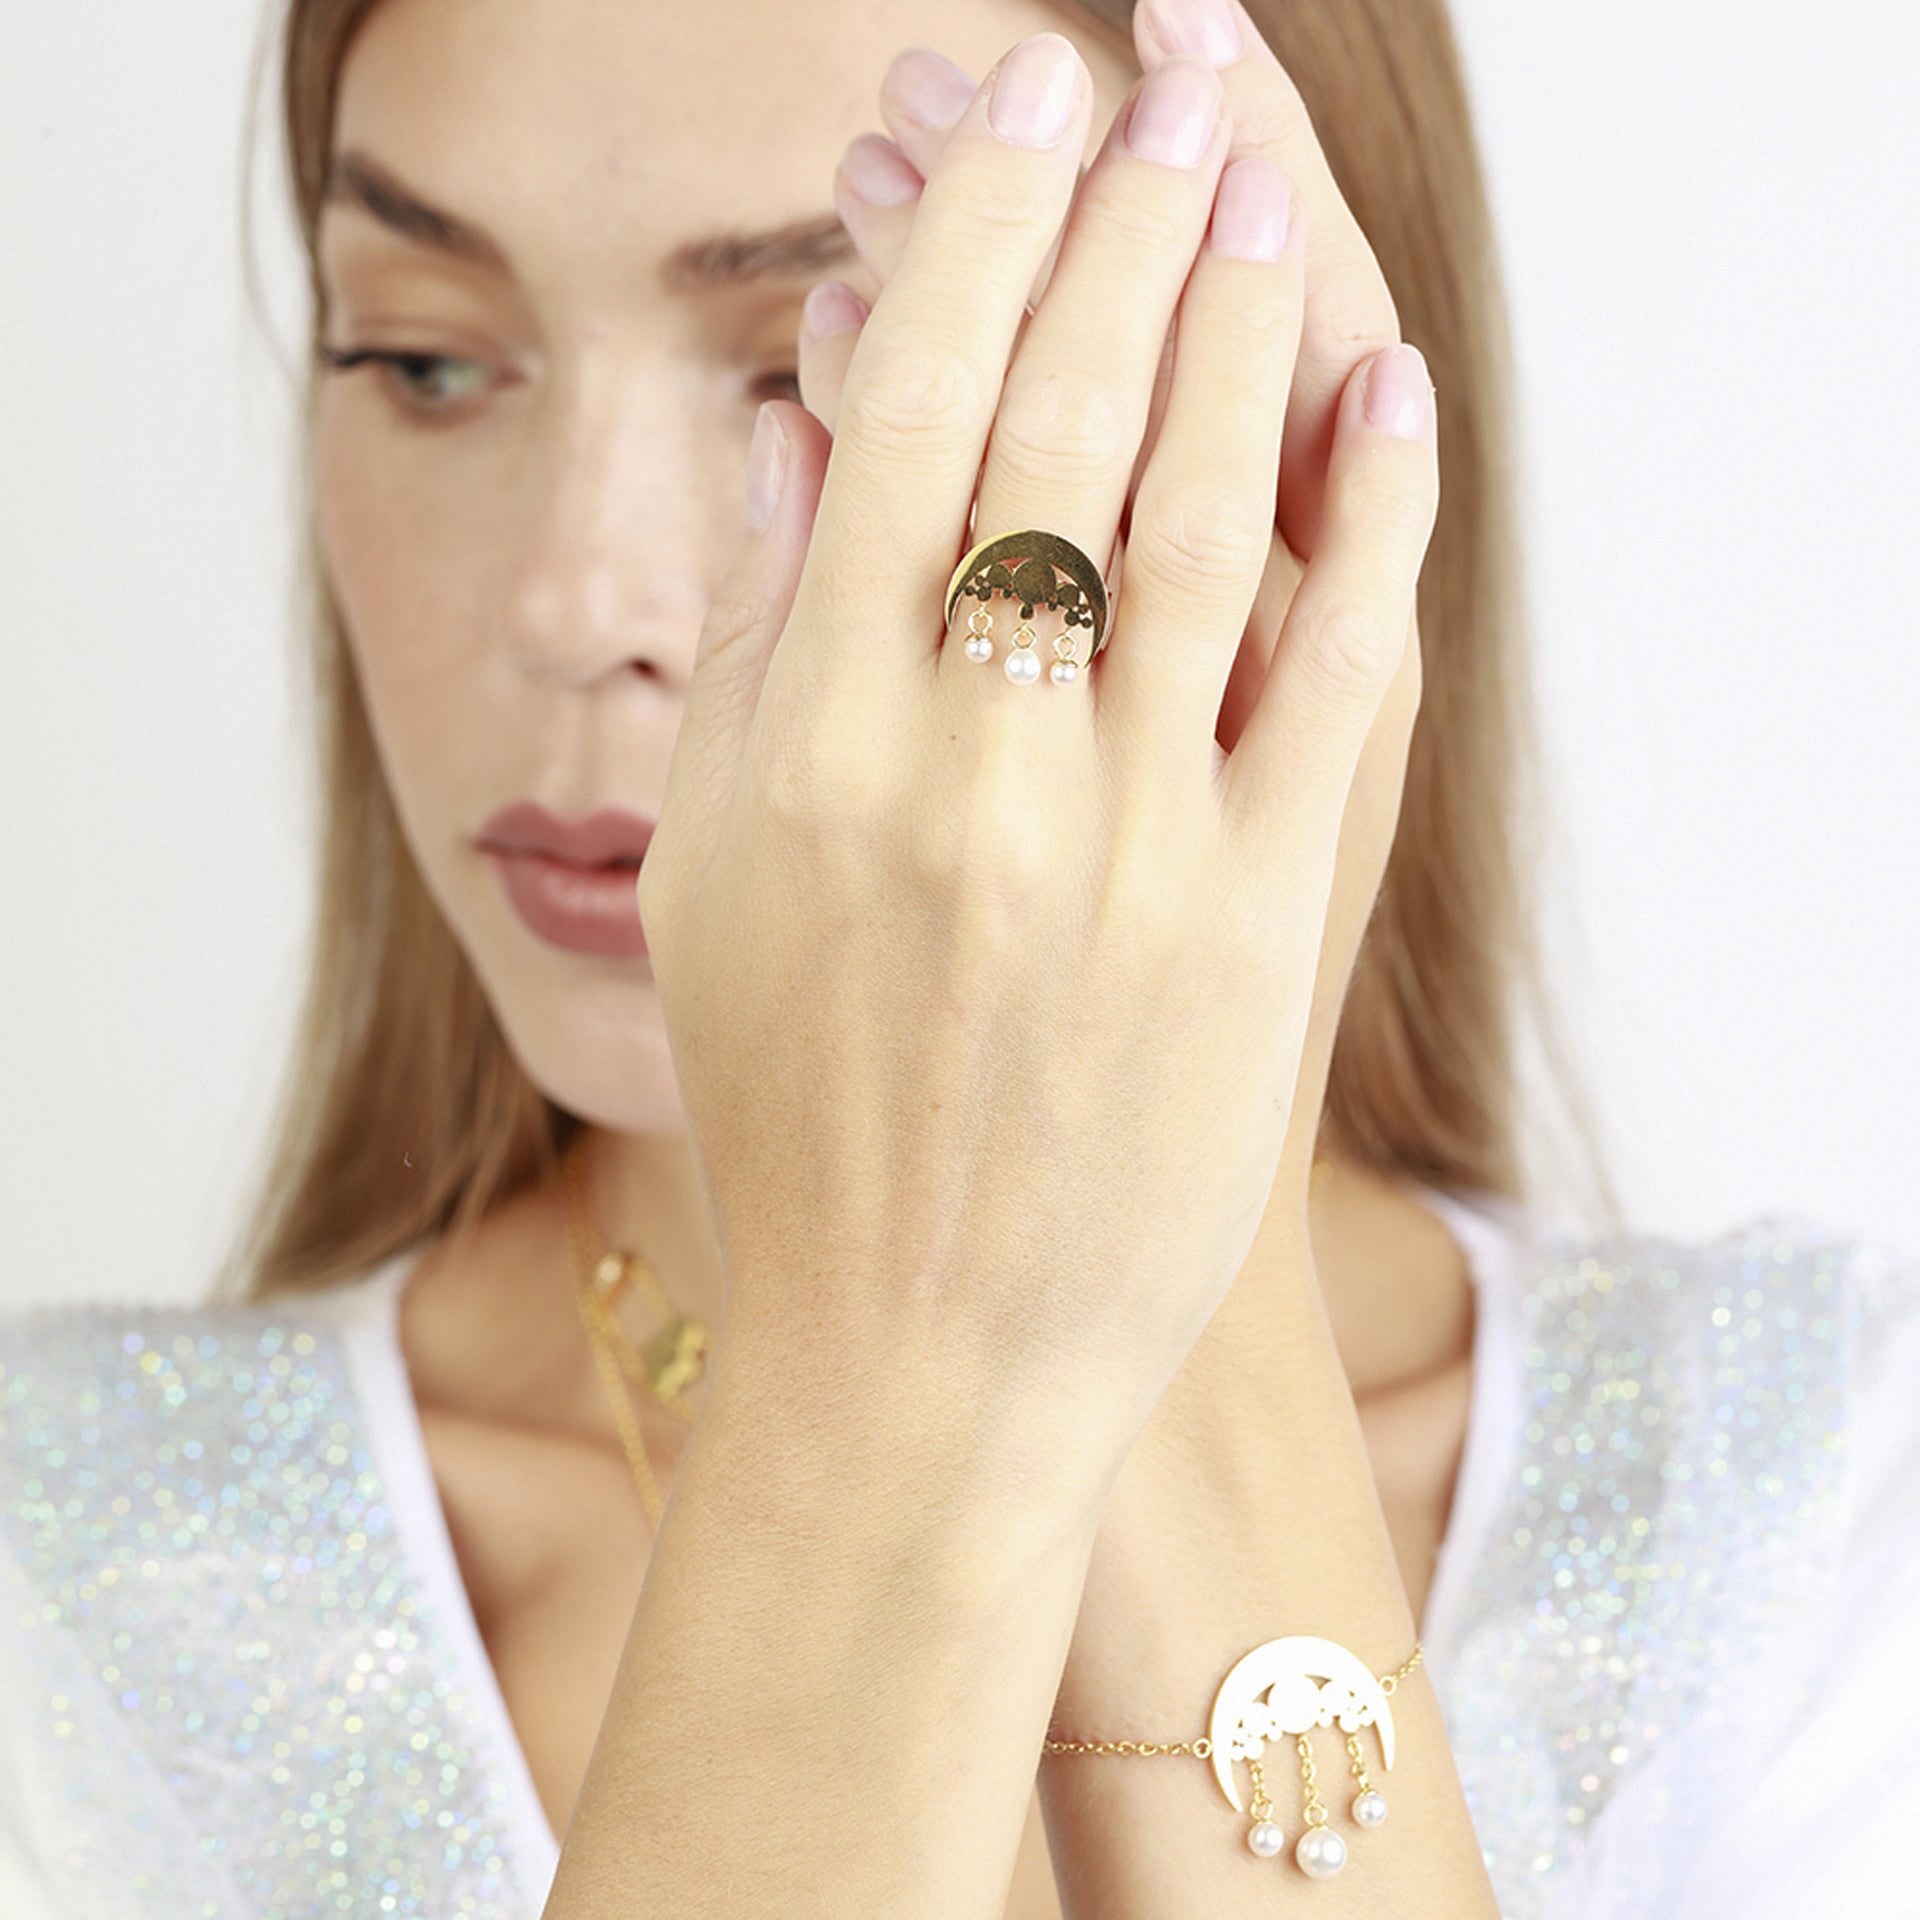 Noor Gold Ring From Le-Soleil